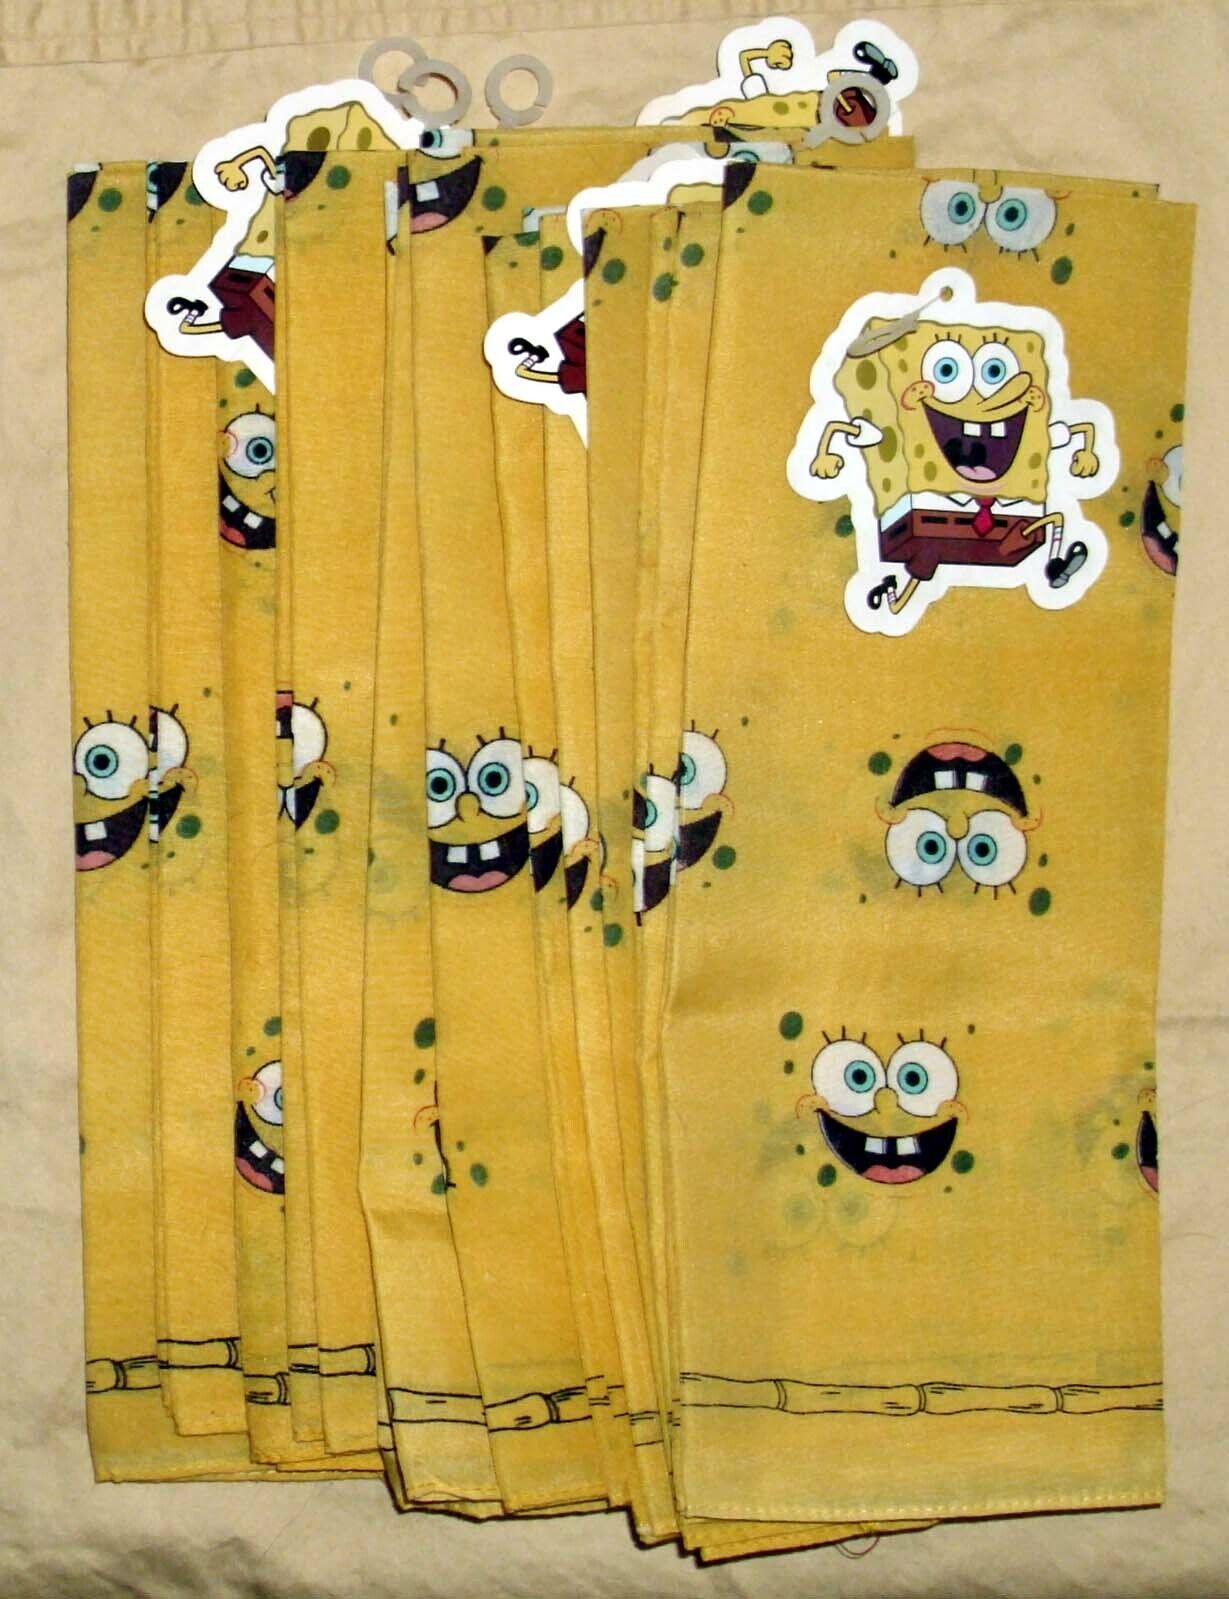 Spongebob Squarepants 11 Pcs Cotton/polyester Scarves With Tags - Only Ones!